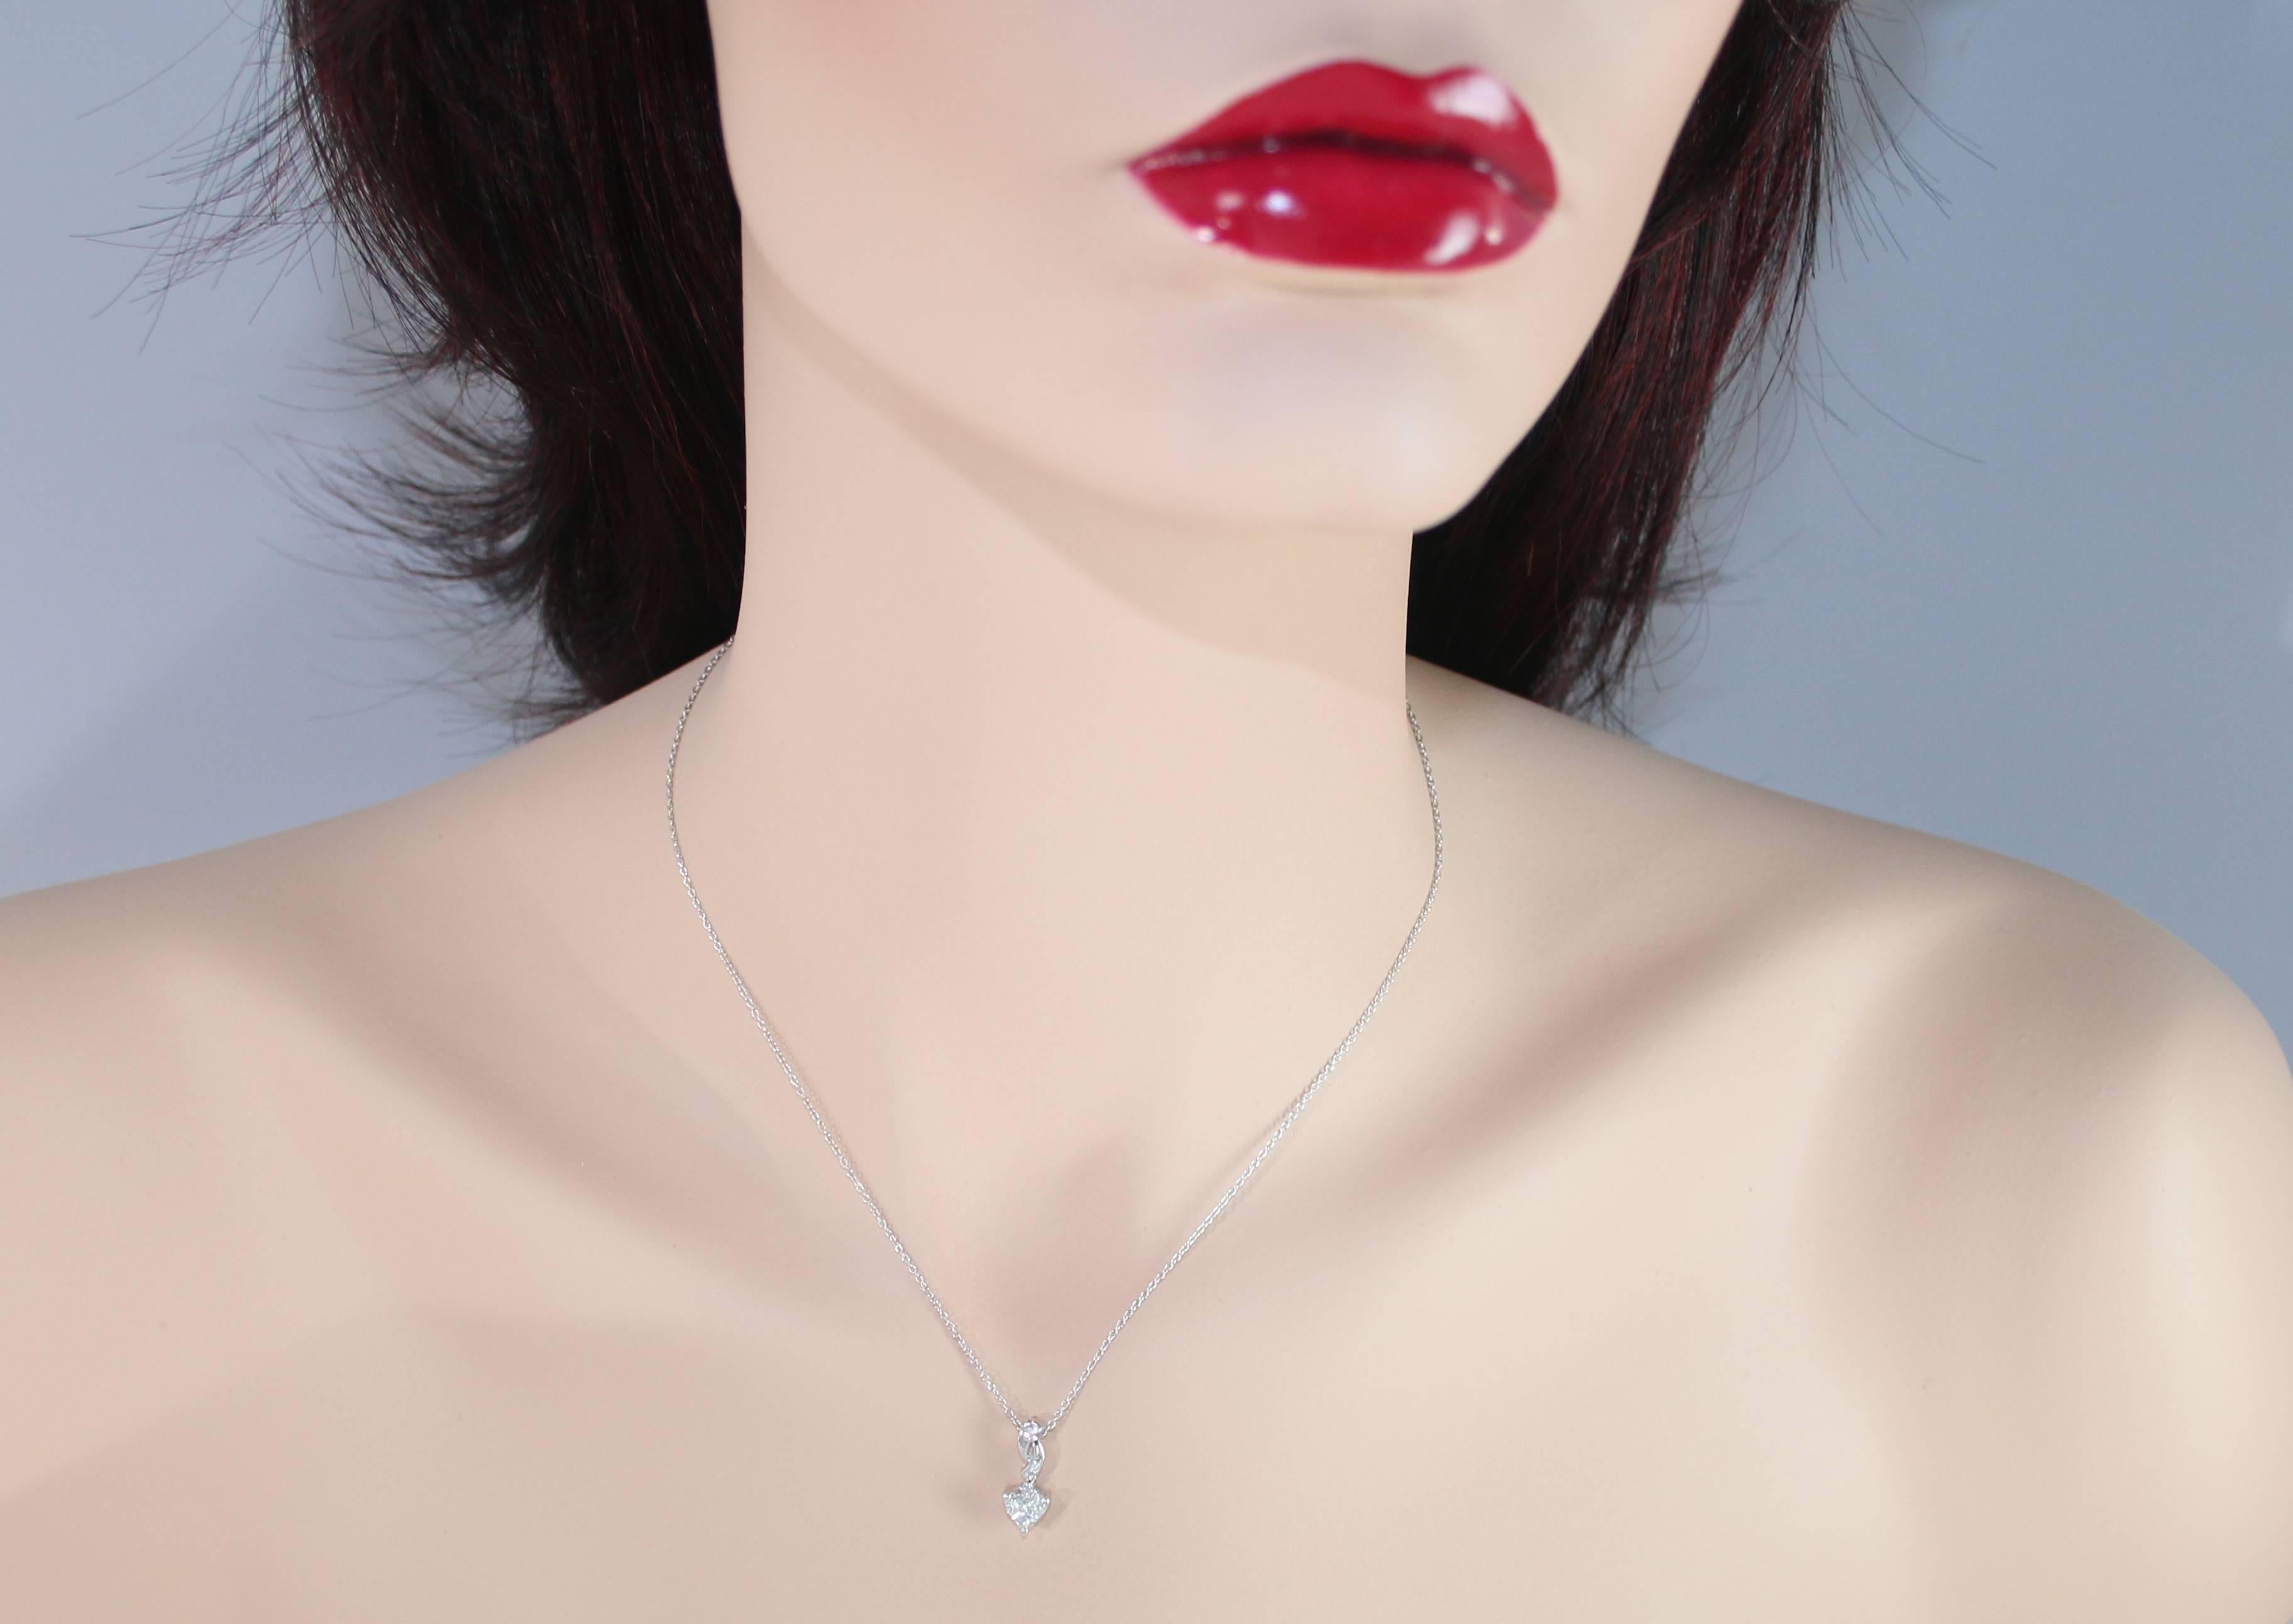 Very Delicate Heart Necklace.
The chain and pendant are both 18K White Gold.
There are 0.94 Carats in Diamonds F VS.
The pendant measures 11/16